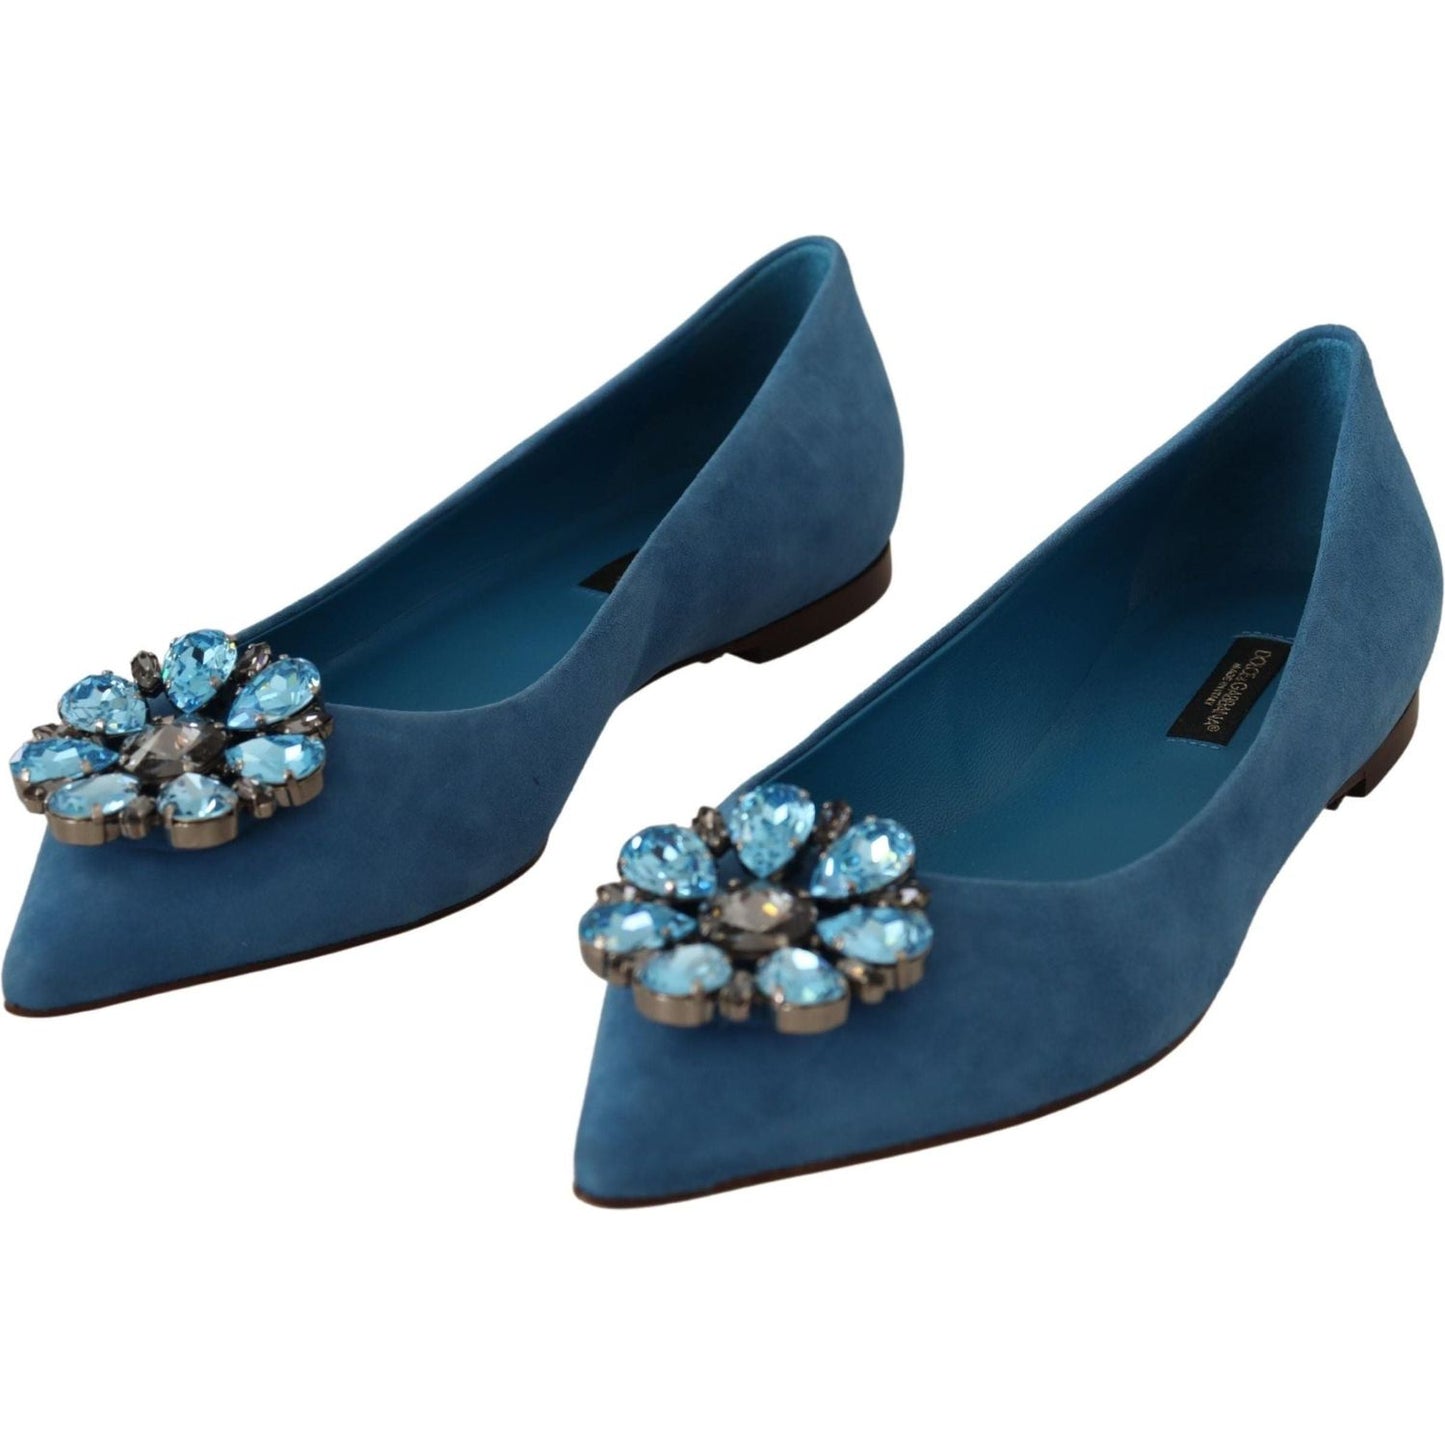 Dolce & Gabbana Elegant Crystal-Embellished Suede Flats blue-suede-crystals-loafers-flats-shoes IMG_5784-scaled-b6e722cf-bbc.jpg